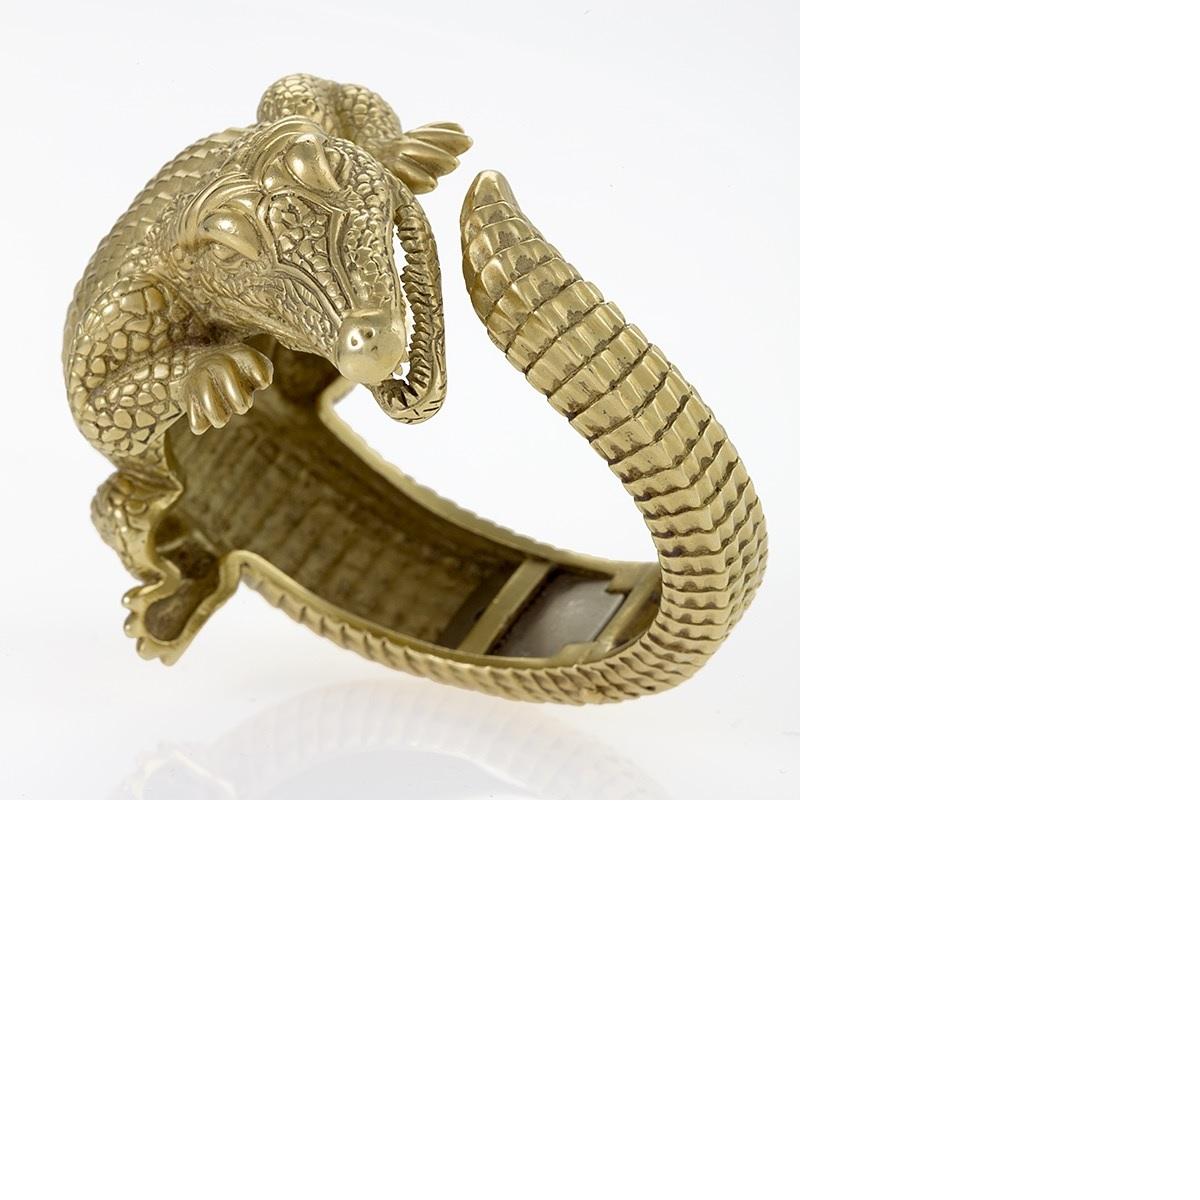 An American late-20th century 18 karat green gold alligator bangle bracelet by American icon Barry Kieselstein-Cord. This particular bracelet, a rare example of the animal cuff in its highly-sought-after 18 karat green gold coloration and the